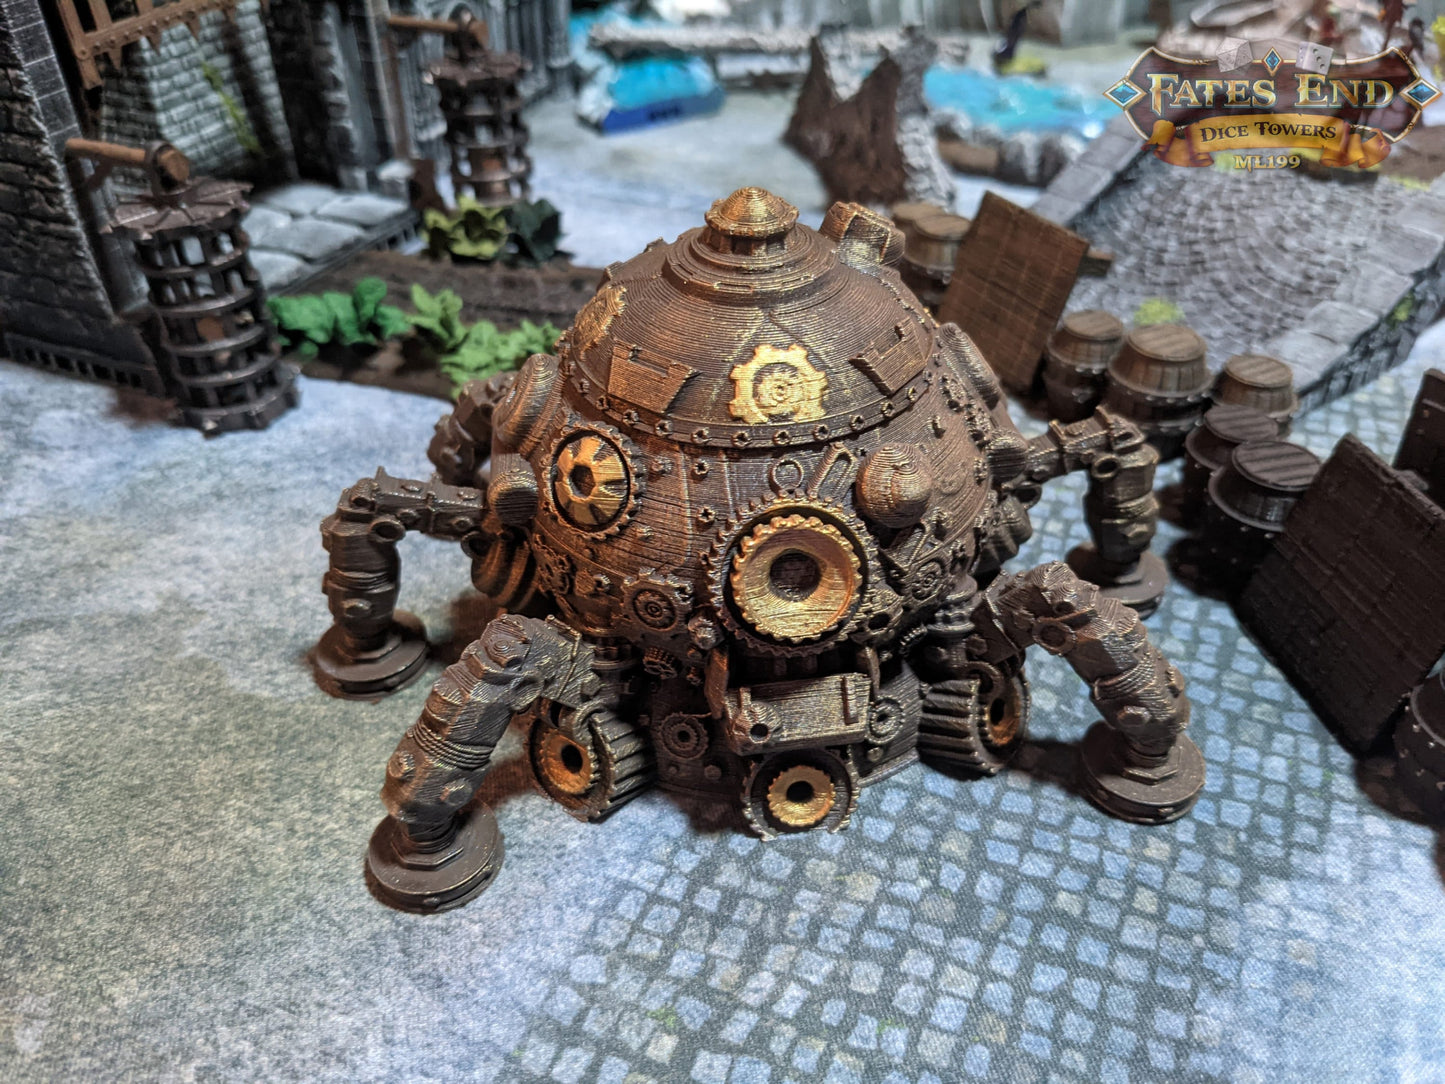 Octo-Tank Steampunk 3D Printed Dice Box/Dice Jail/Dice Vault - Fate's End Collection - Tabletop RPG Cosplay- Industrial Elegance & Precision